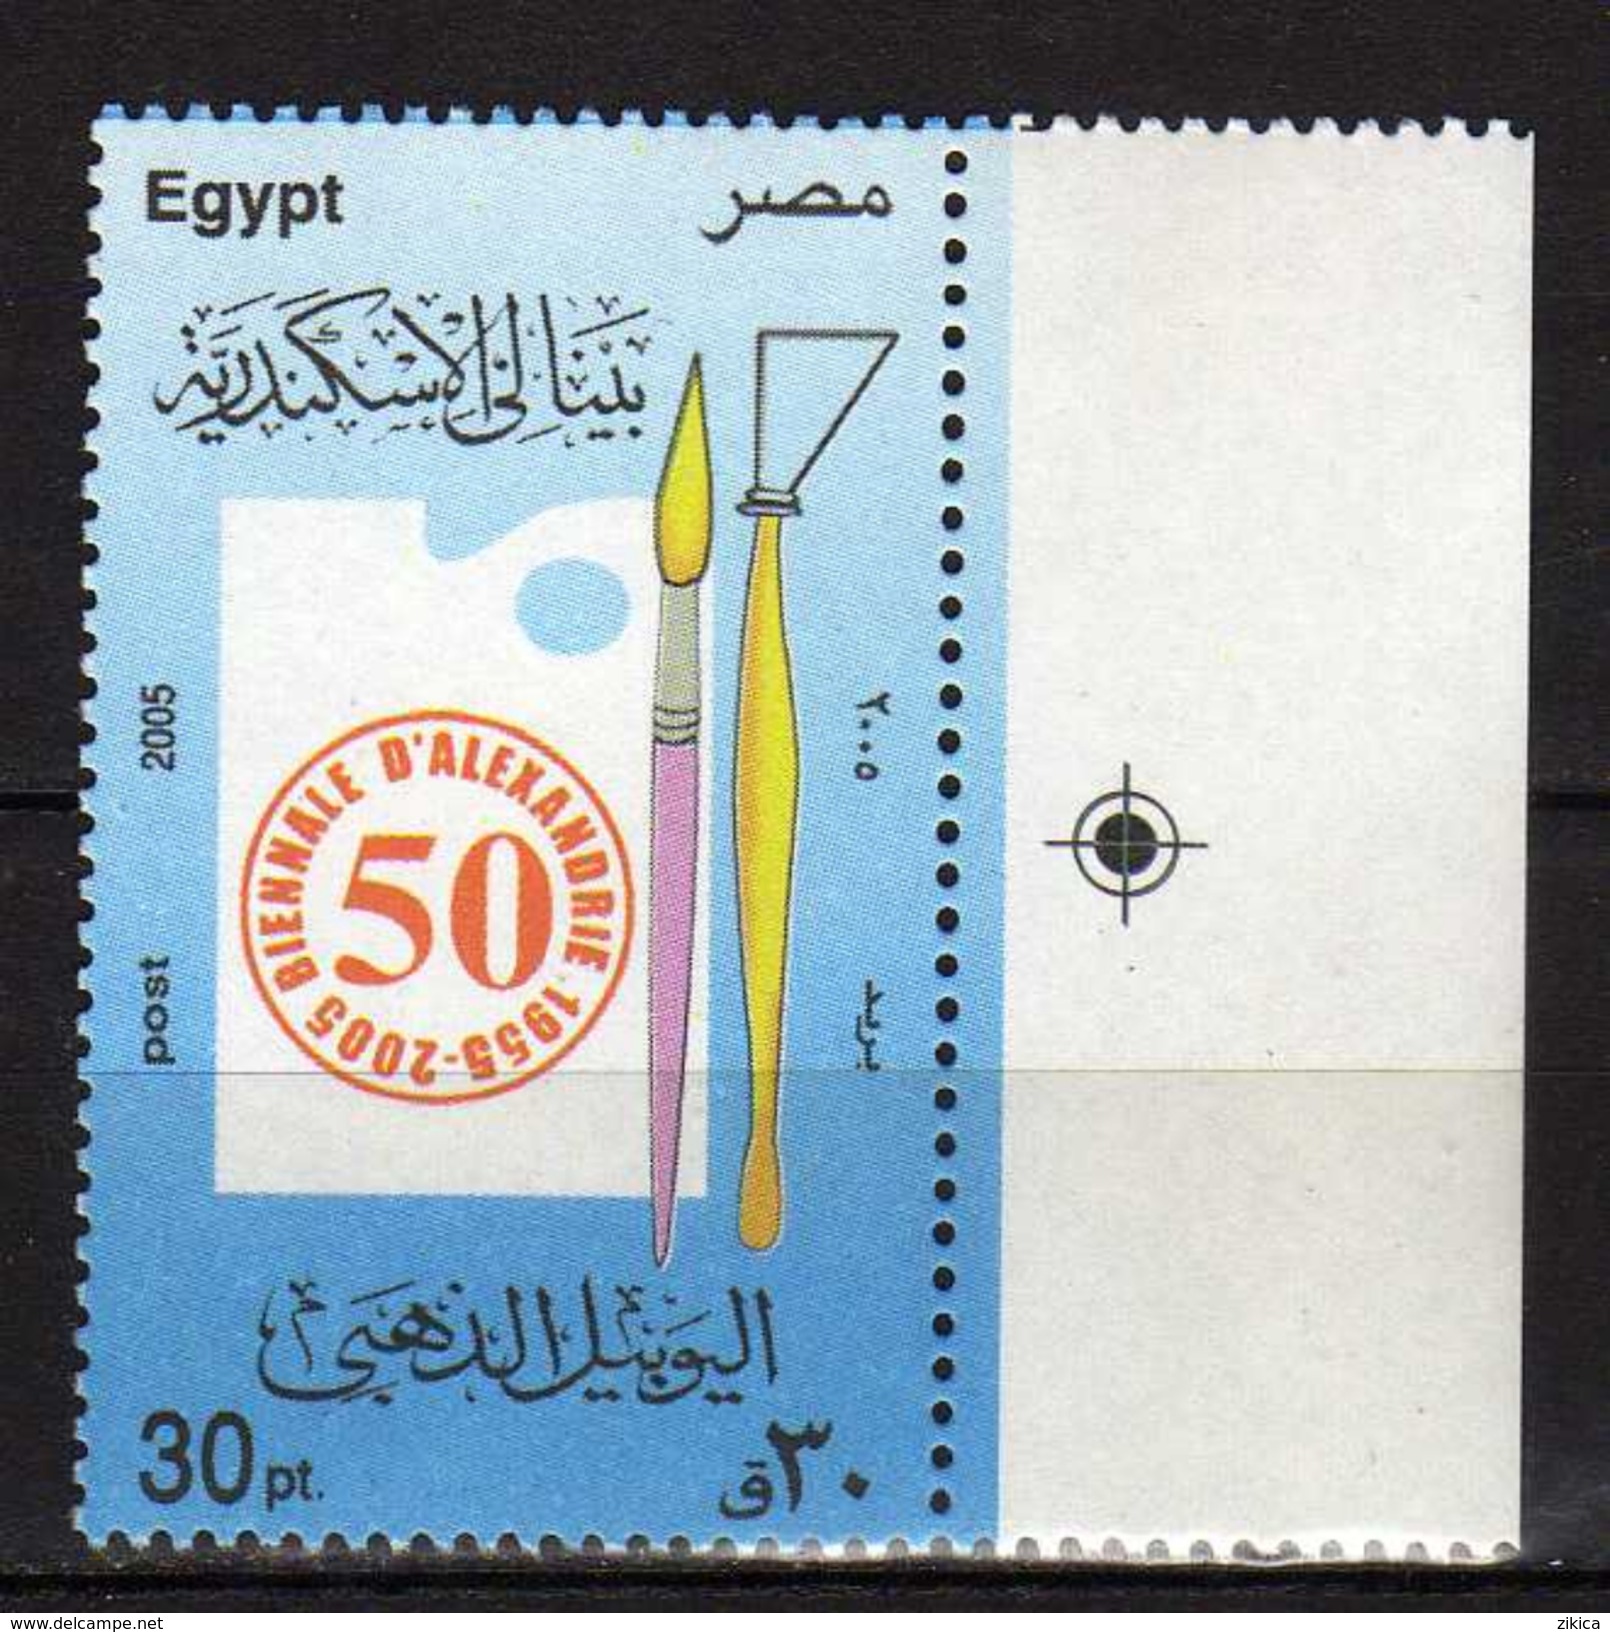 Egypt 2005 The 50th Anniversary Of Alexandria Biennale (Cultural And Scientific Event).MNH - Ongebruikt